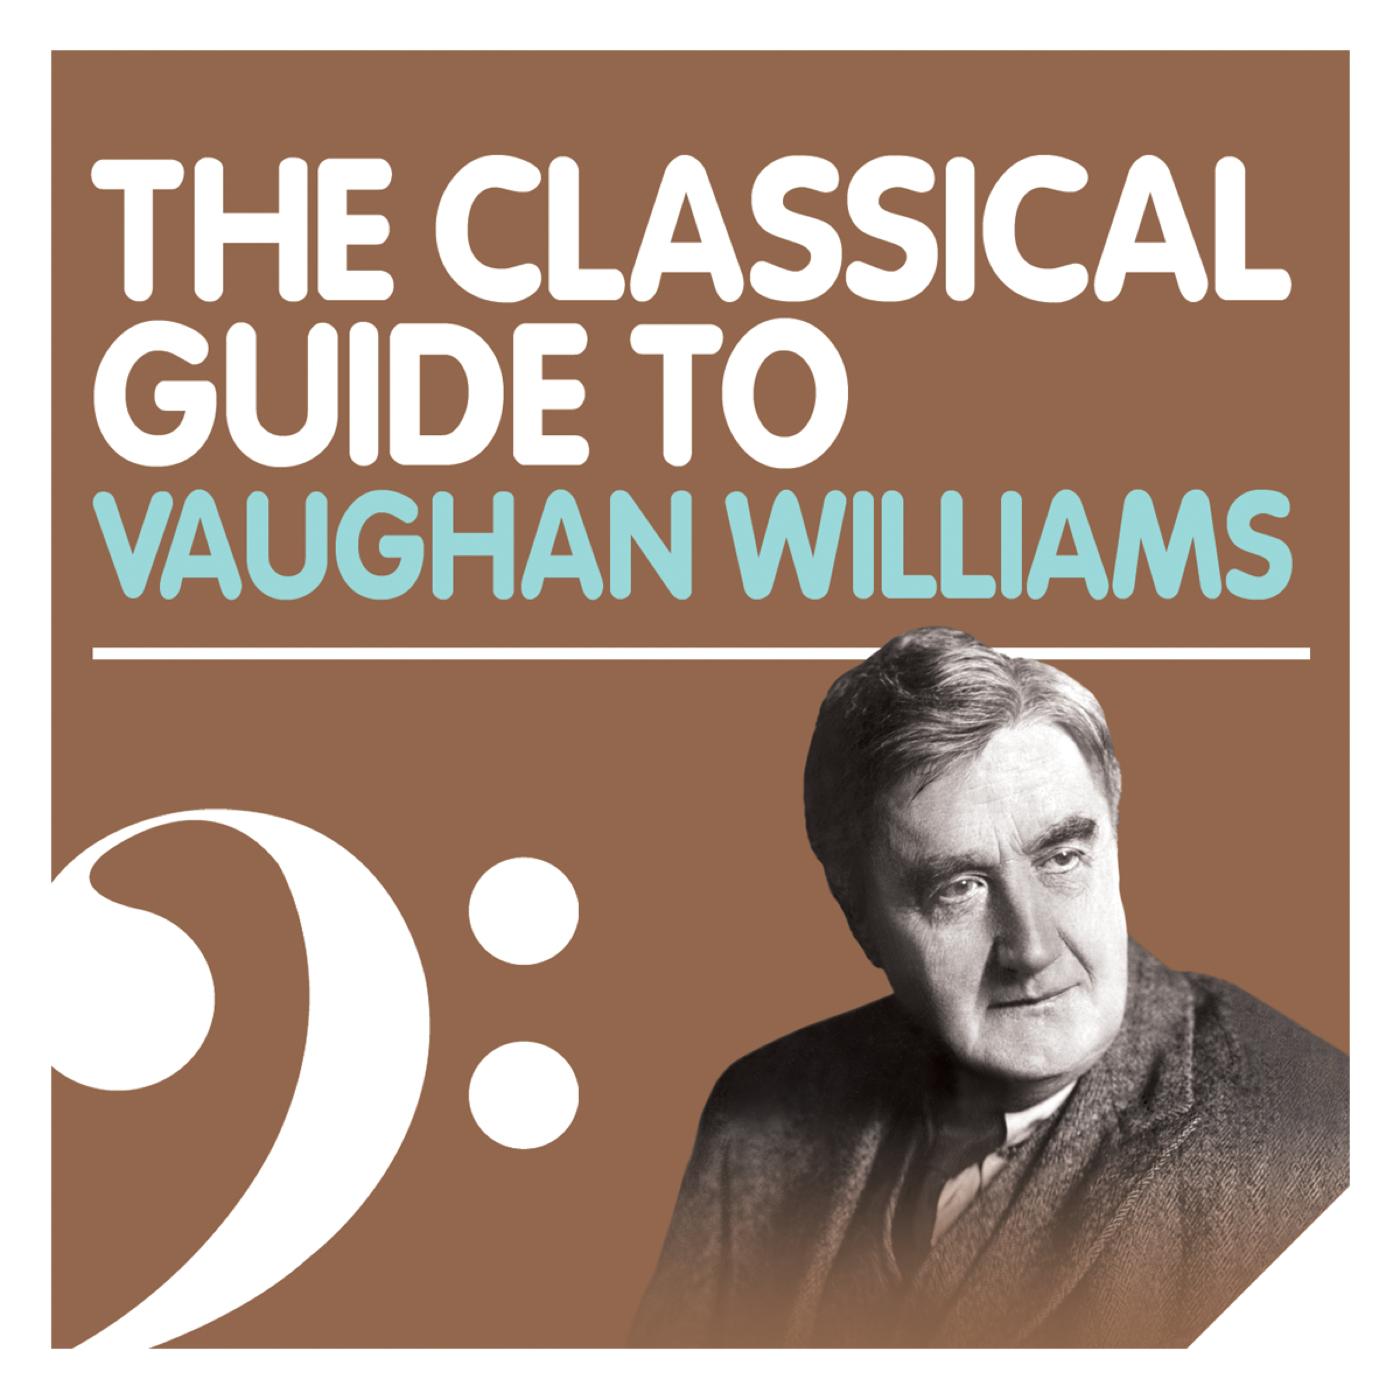 The Classical Guide to Vaughan Williams